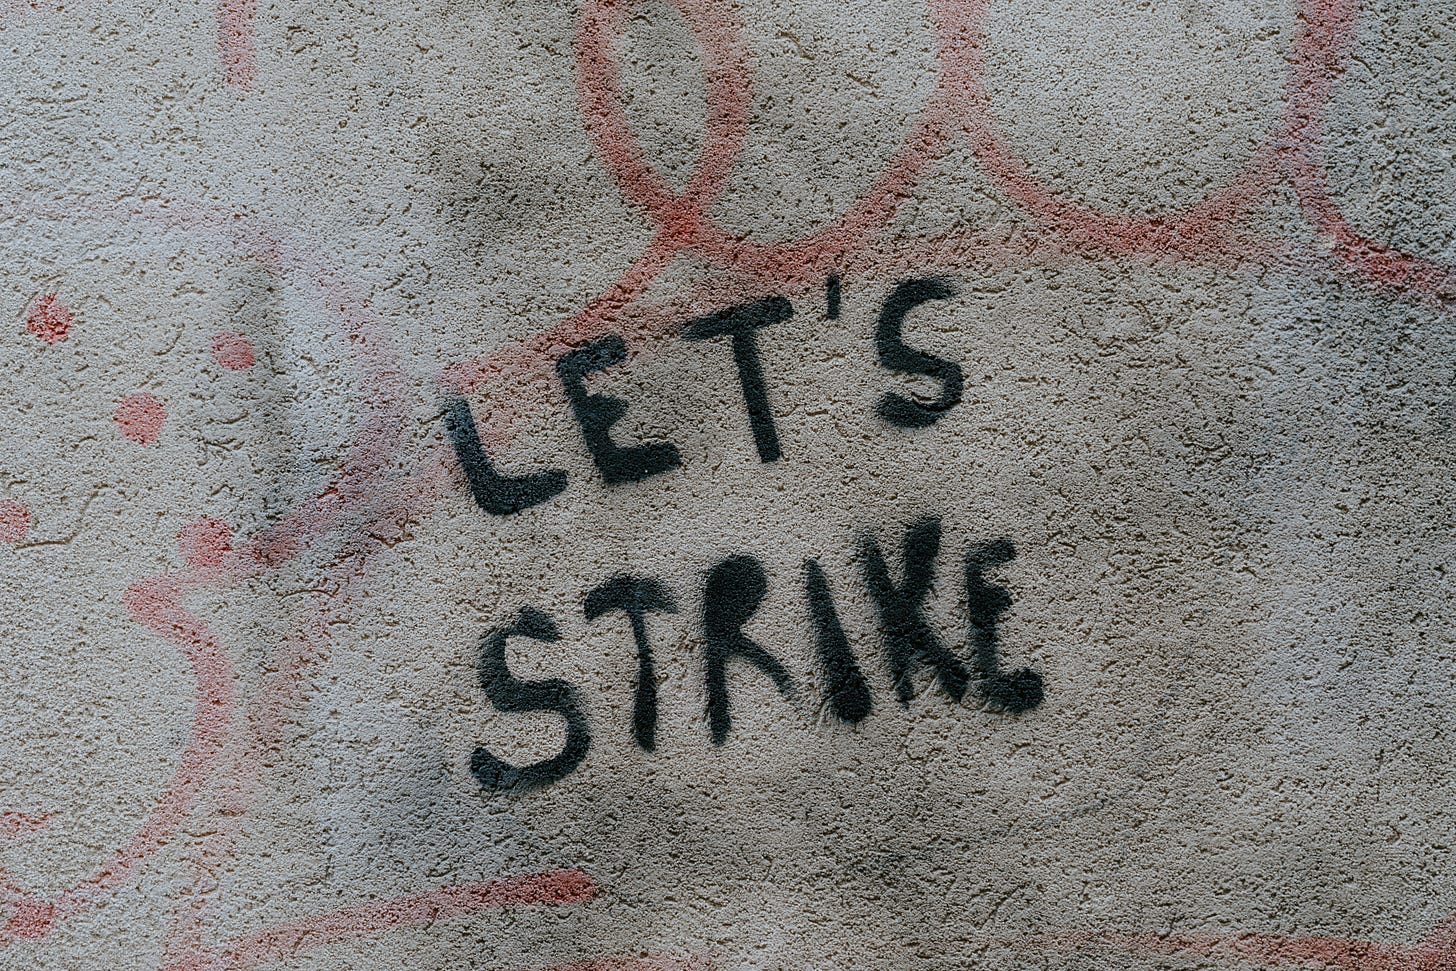 The words "Let's strike" are spraypainted in black on a great wall.